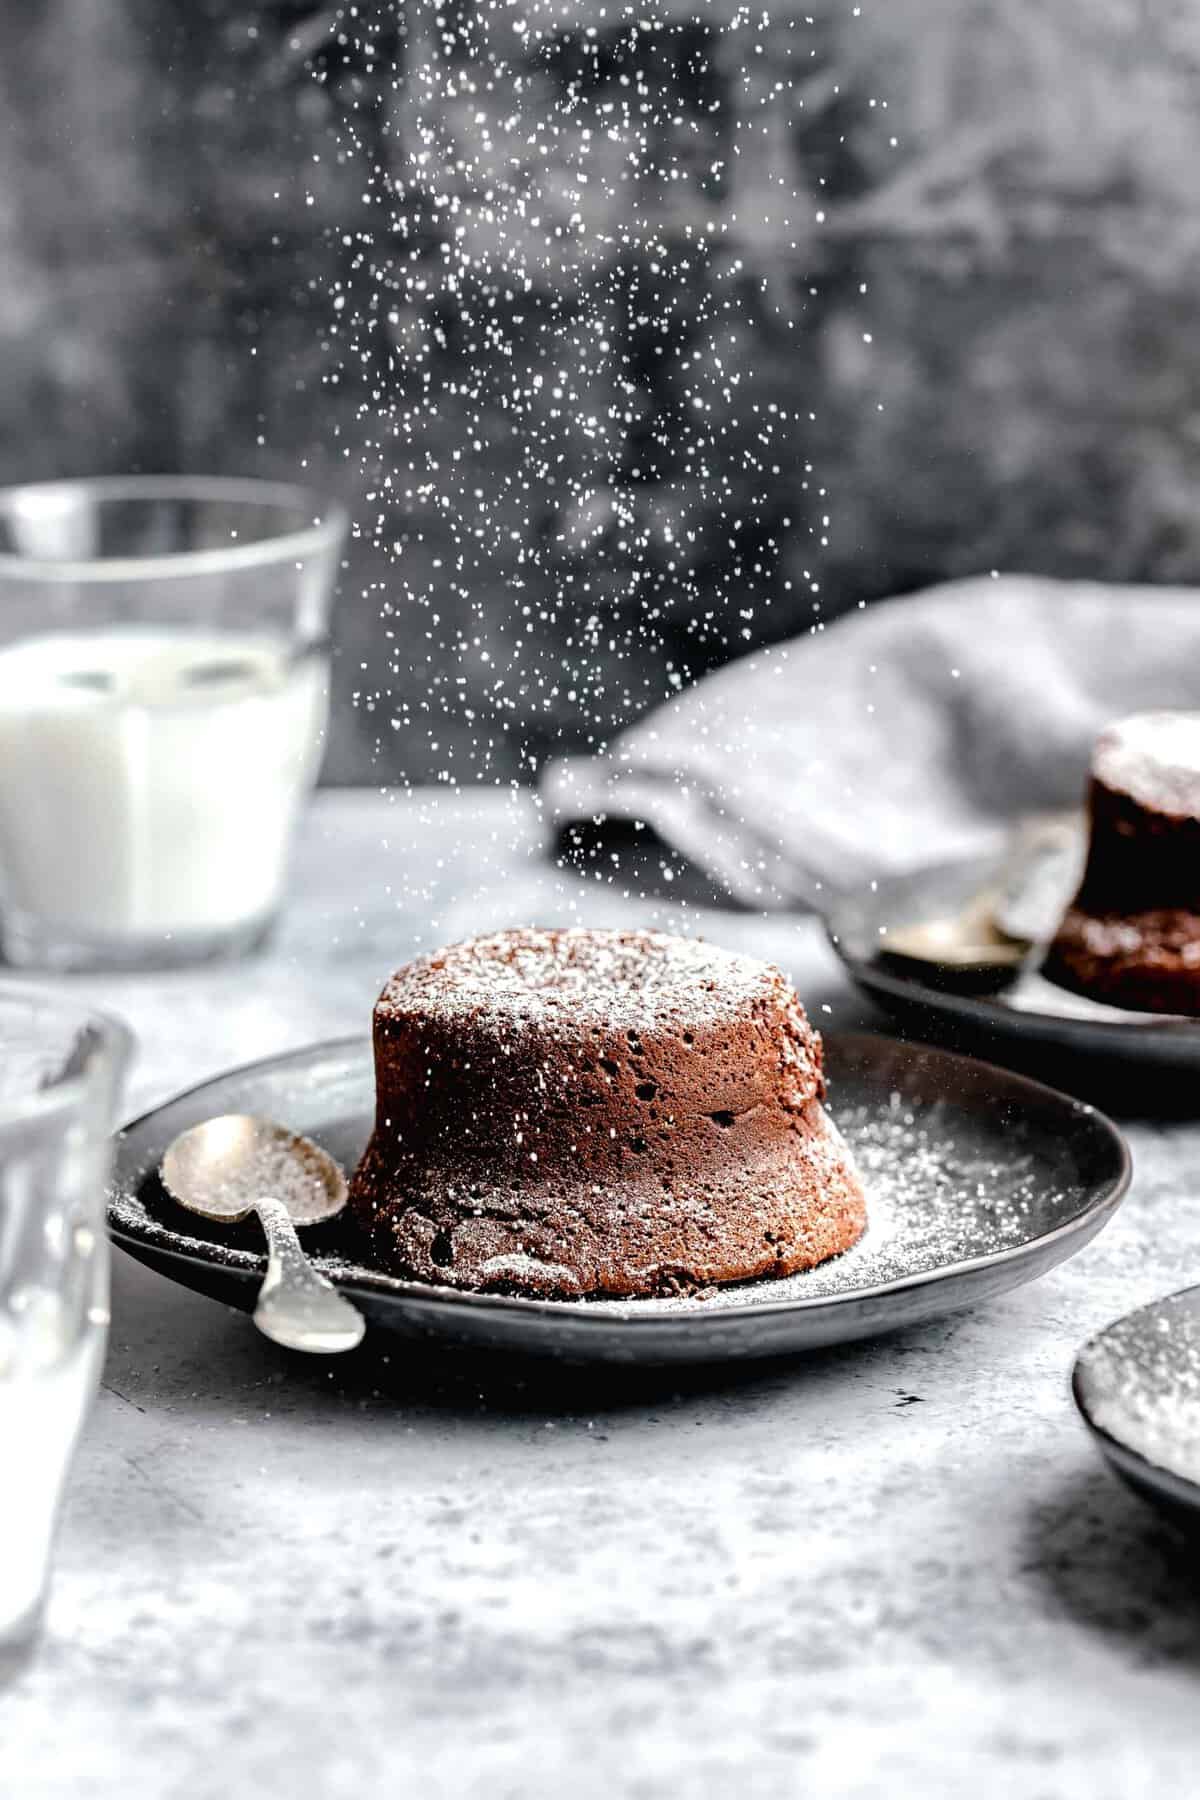 Dusting molten lava cake with powdered sugar.